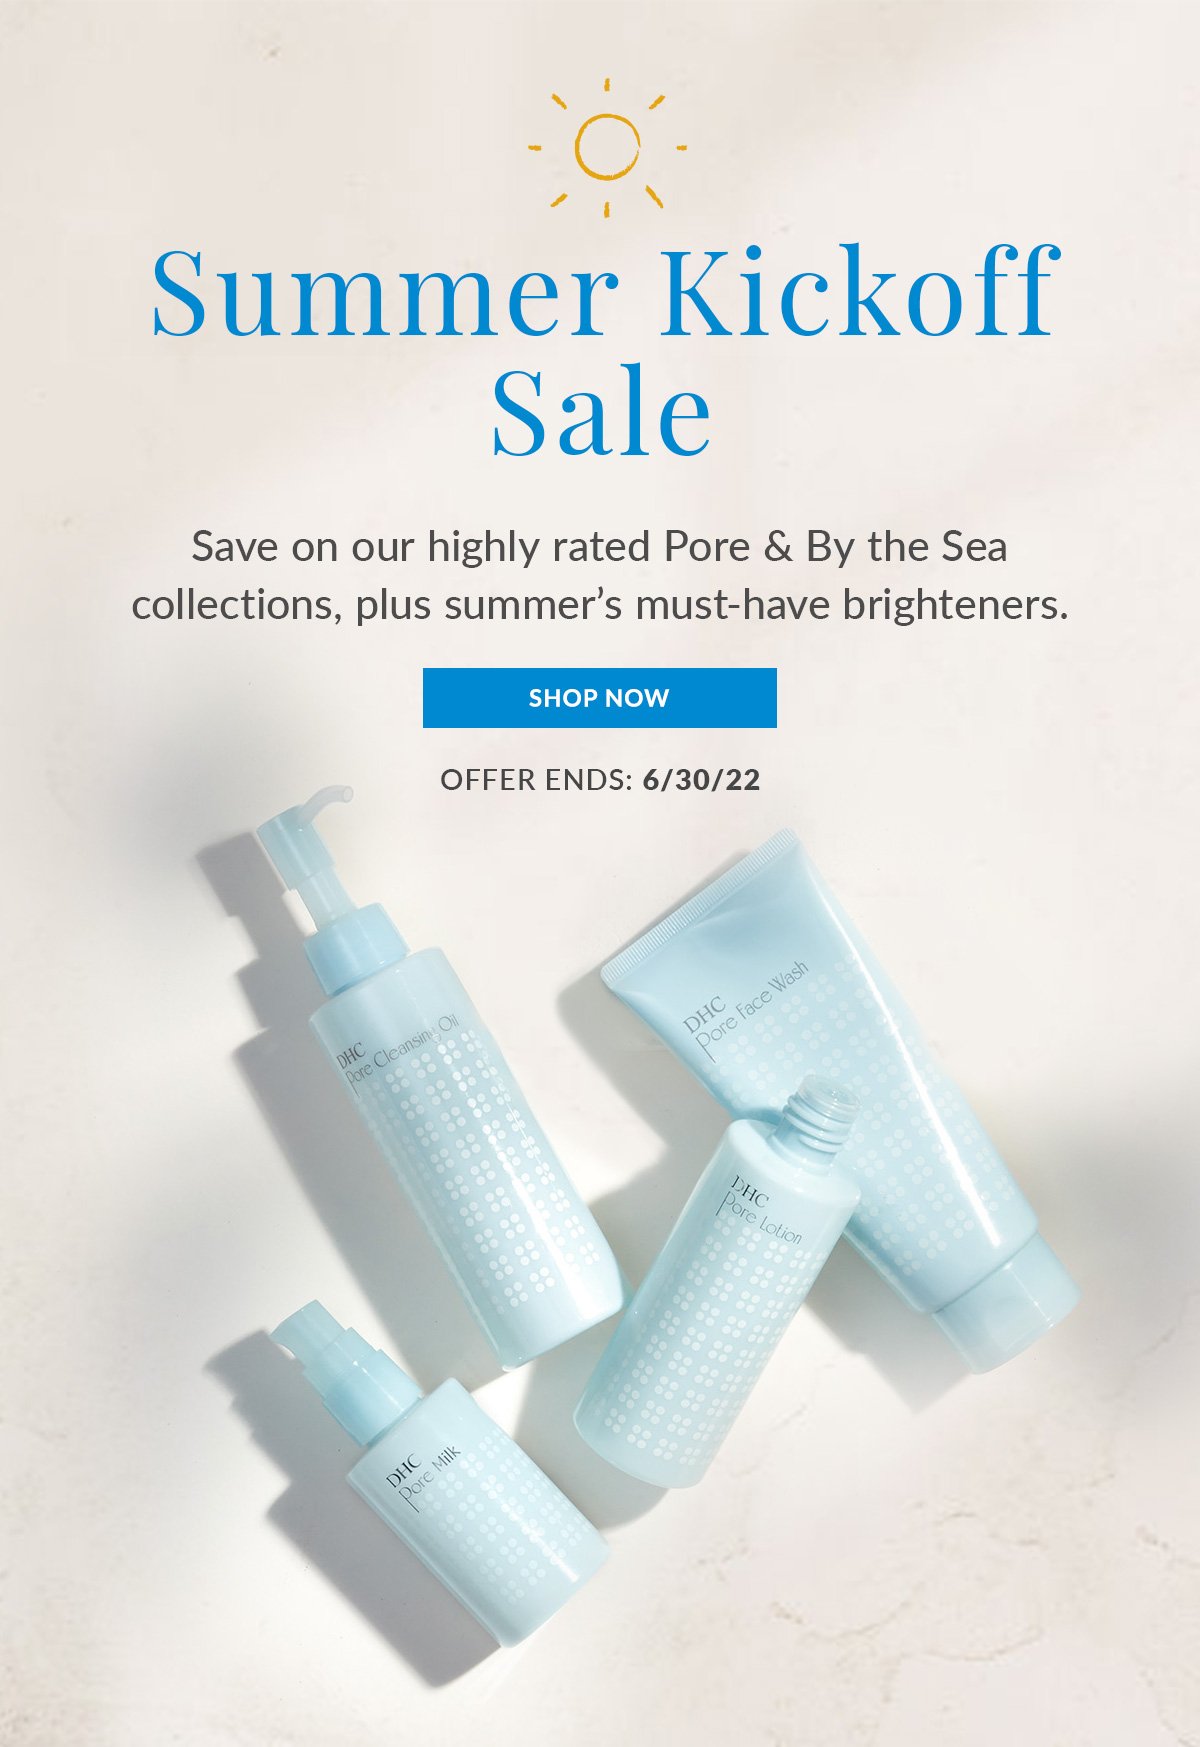 The Summer Kickoff Sale is here